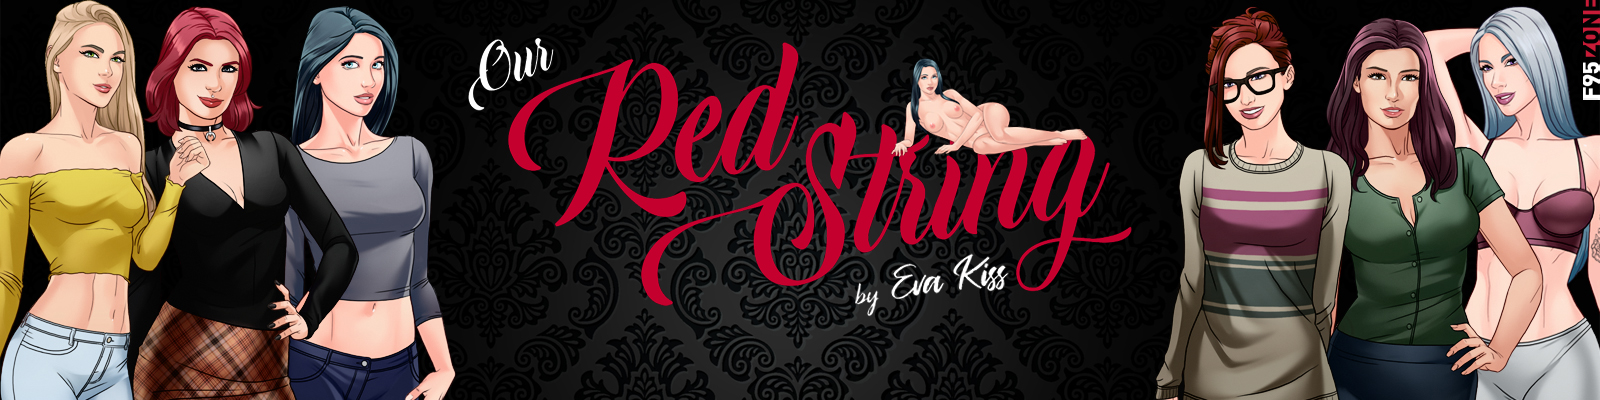 Our Red String1.jpg